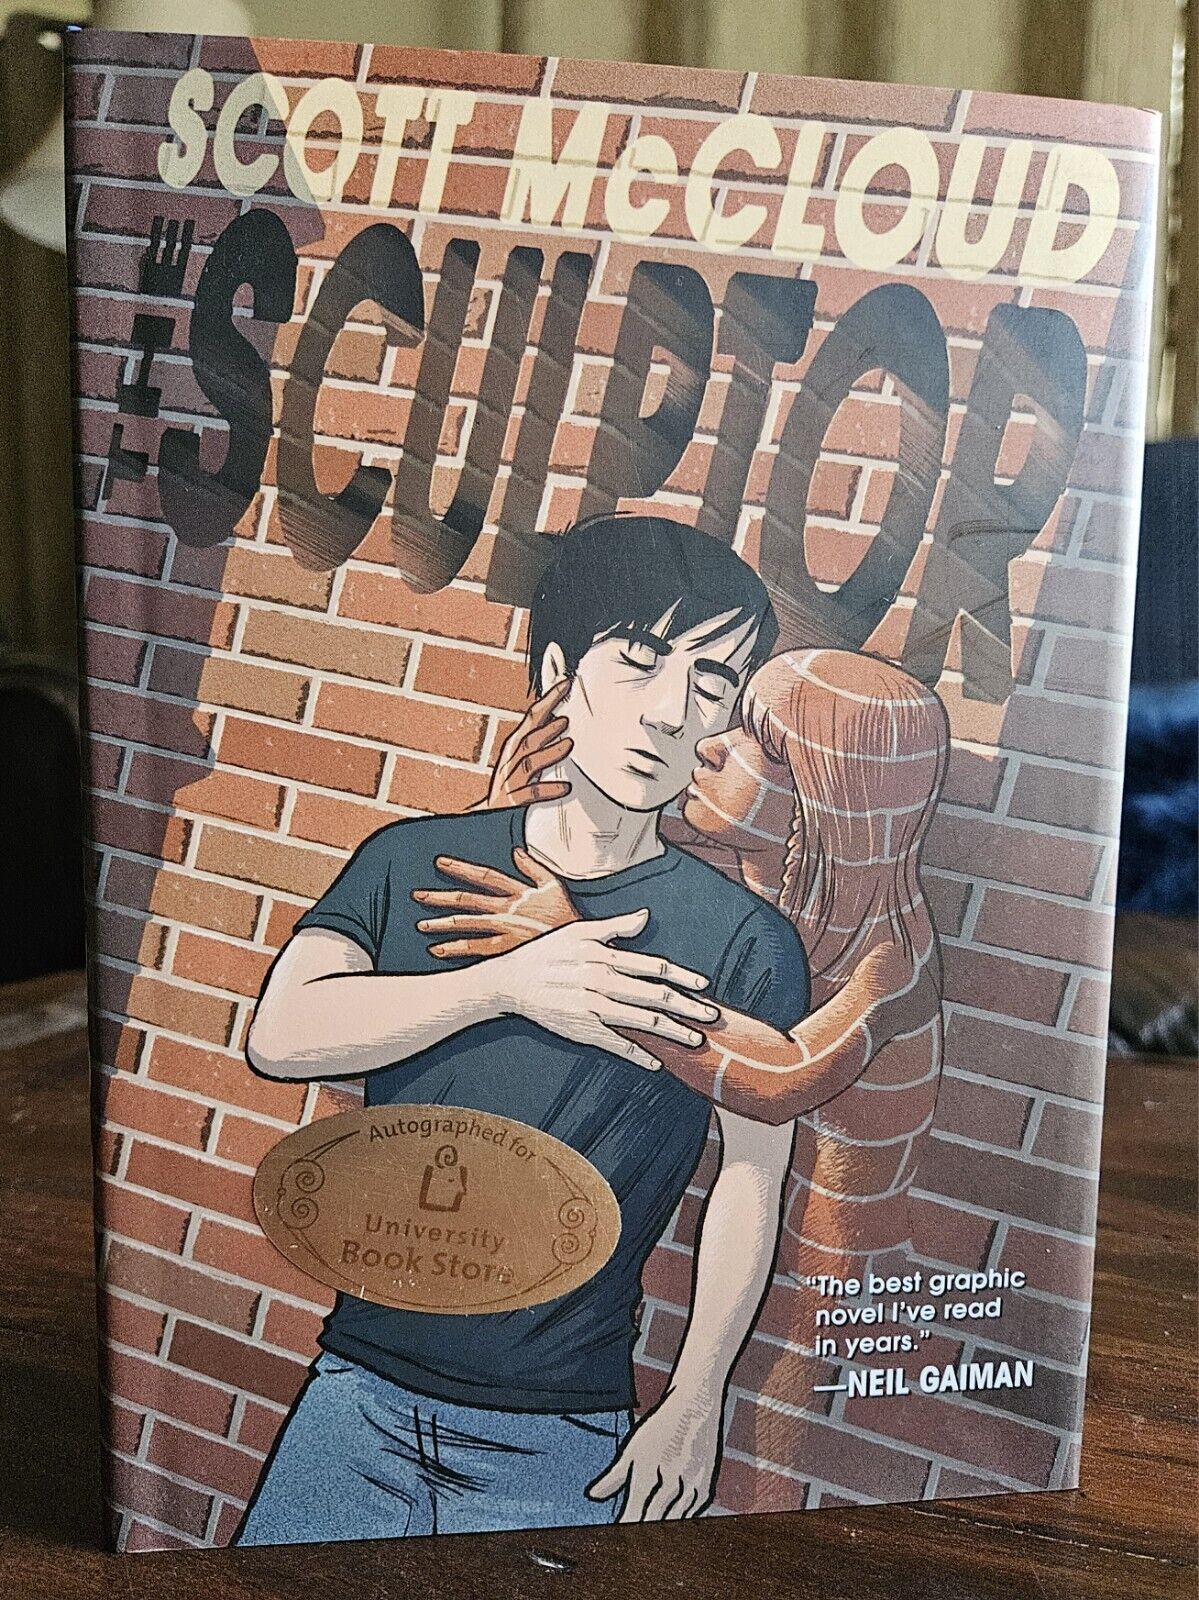 The Sculptor by Scott McCloud (First Second, 2015) *SIGNED* 1st Ed. 1st Printing